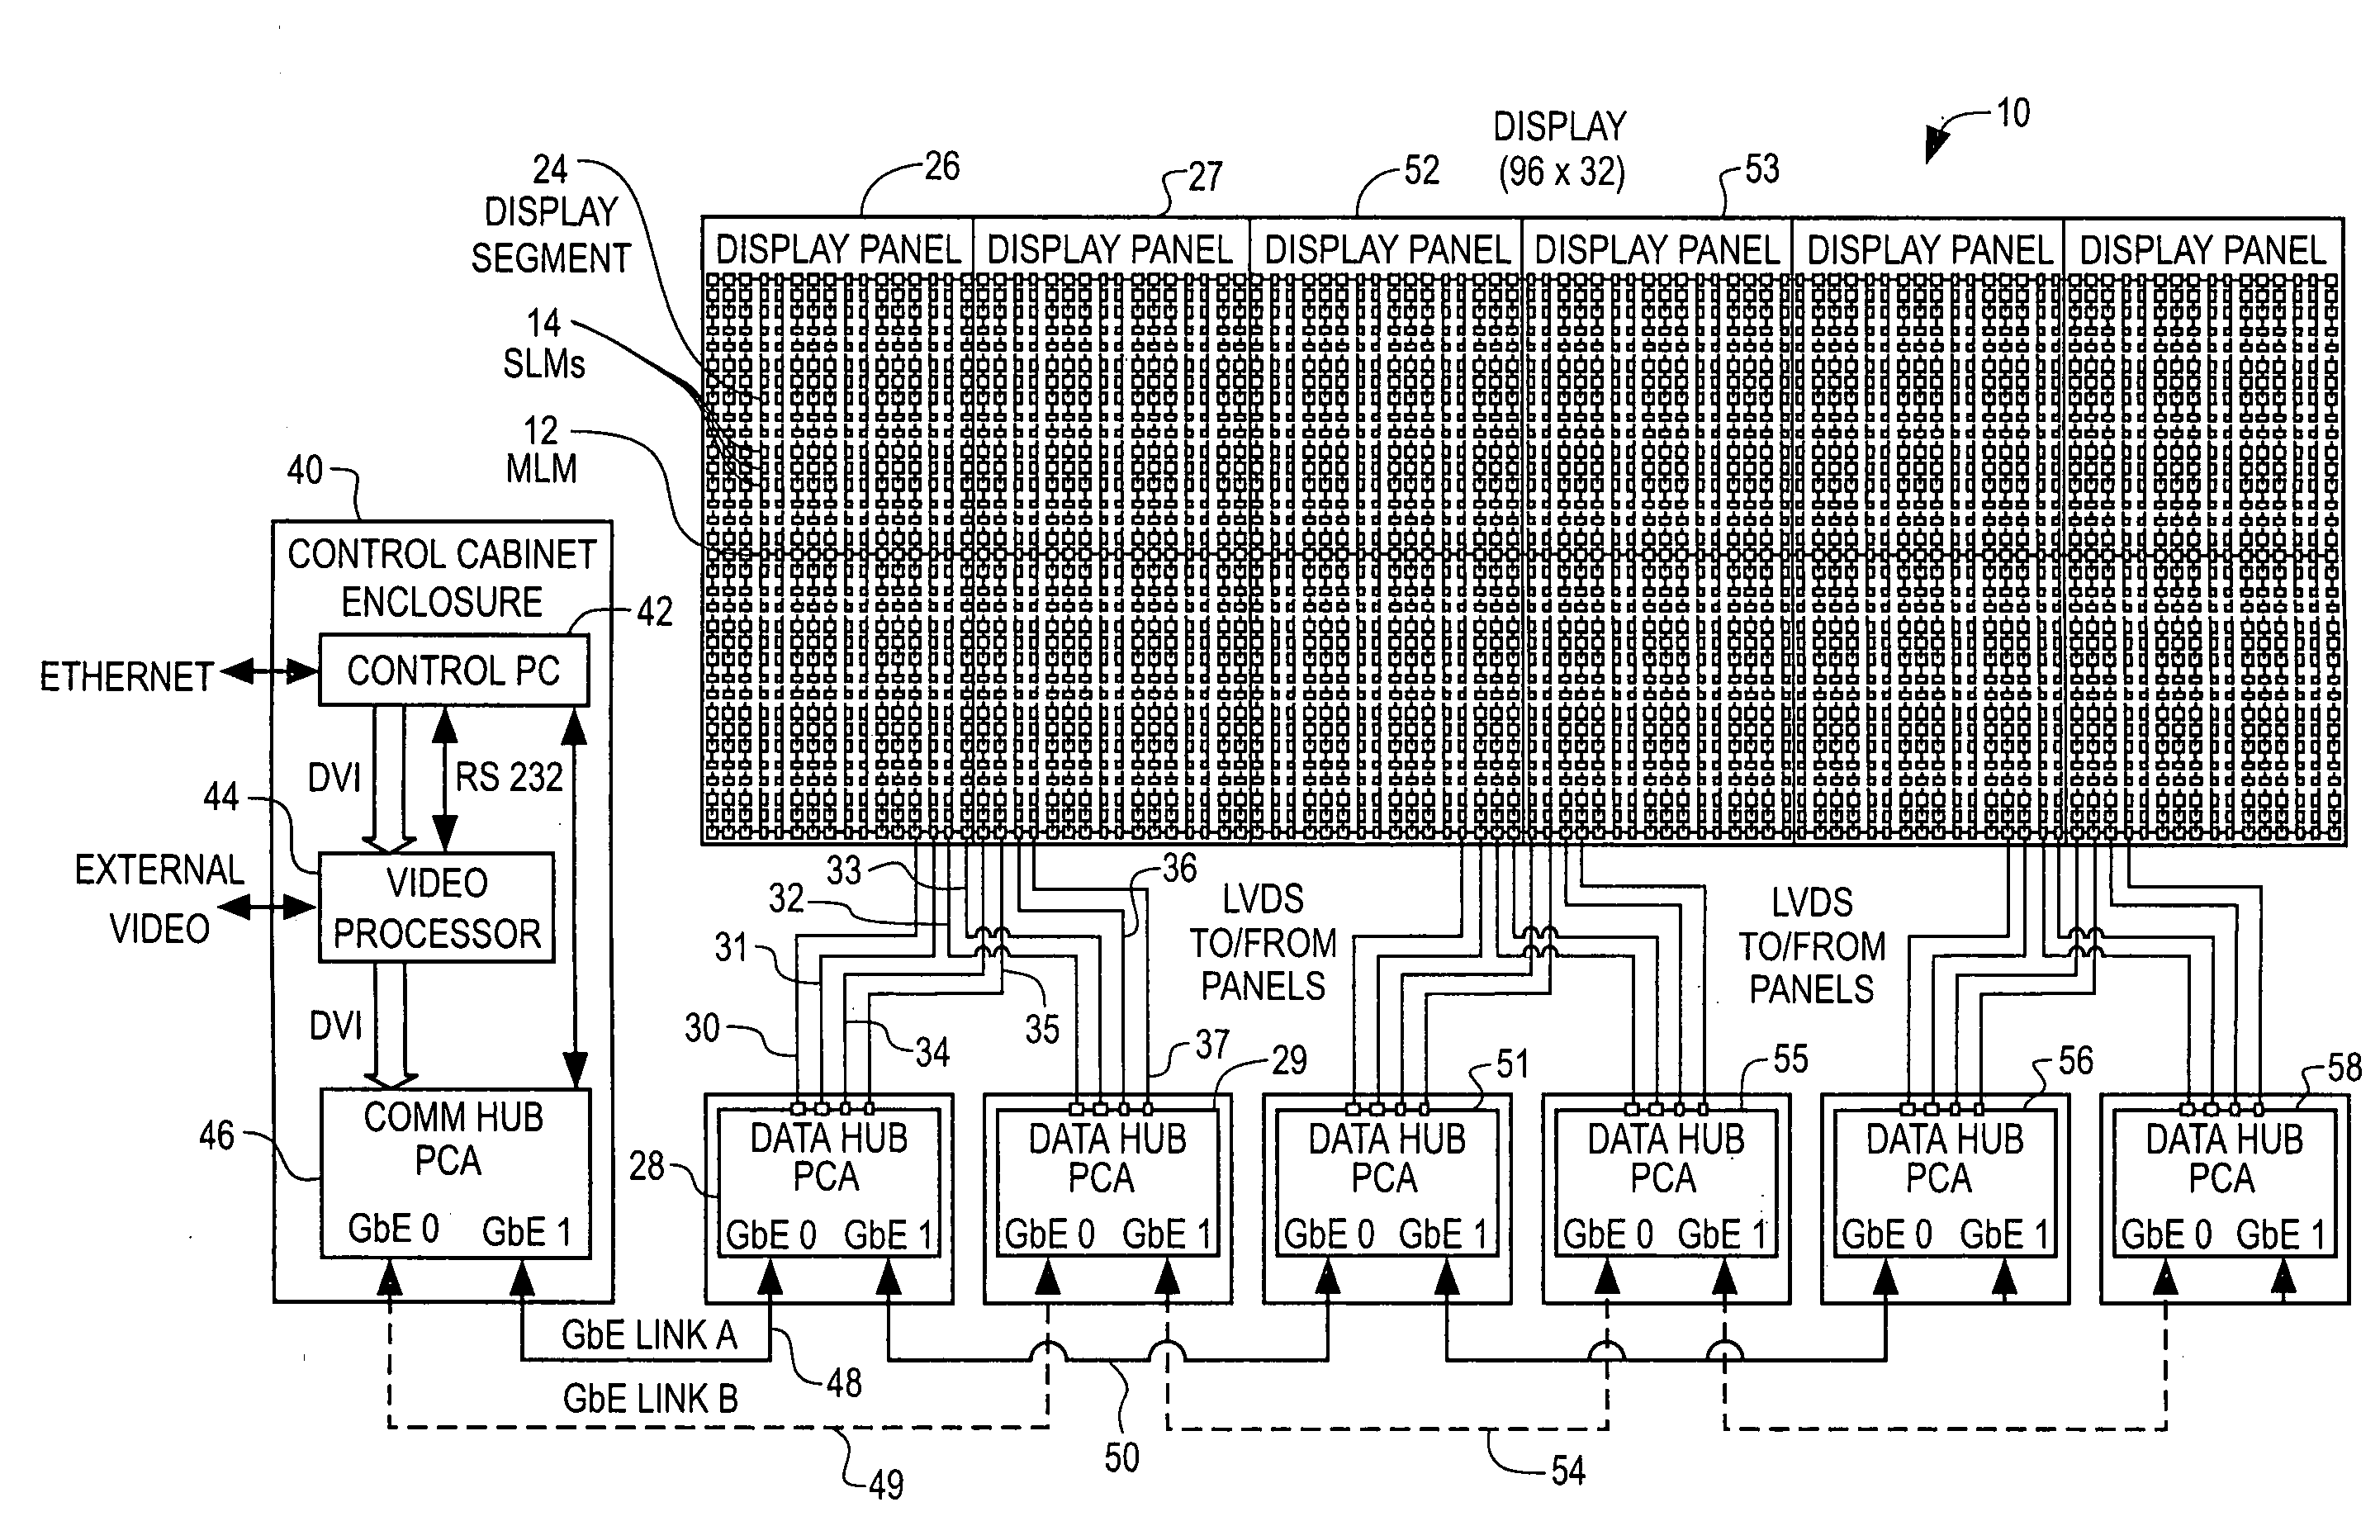 Data and power distribution system and method for a large scale display